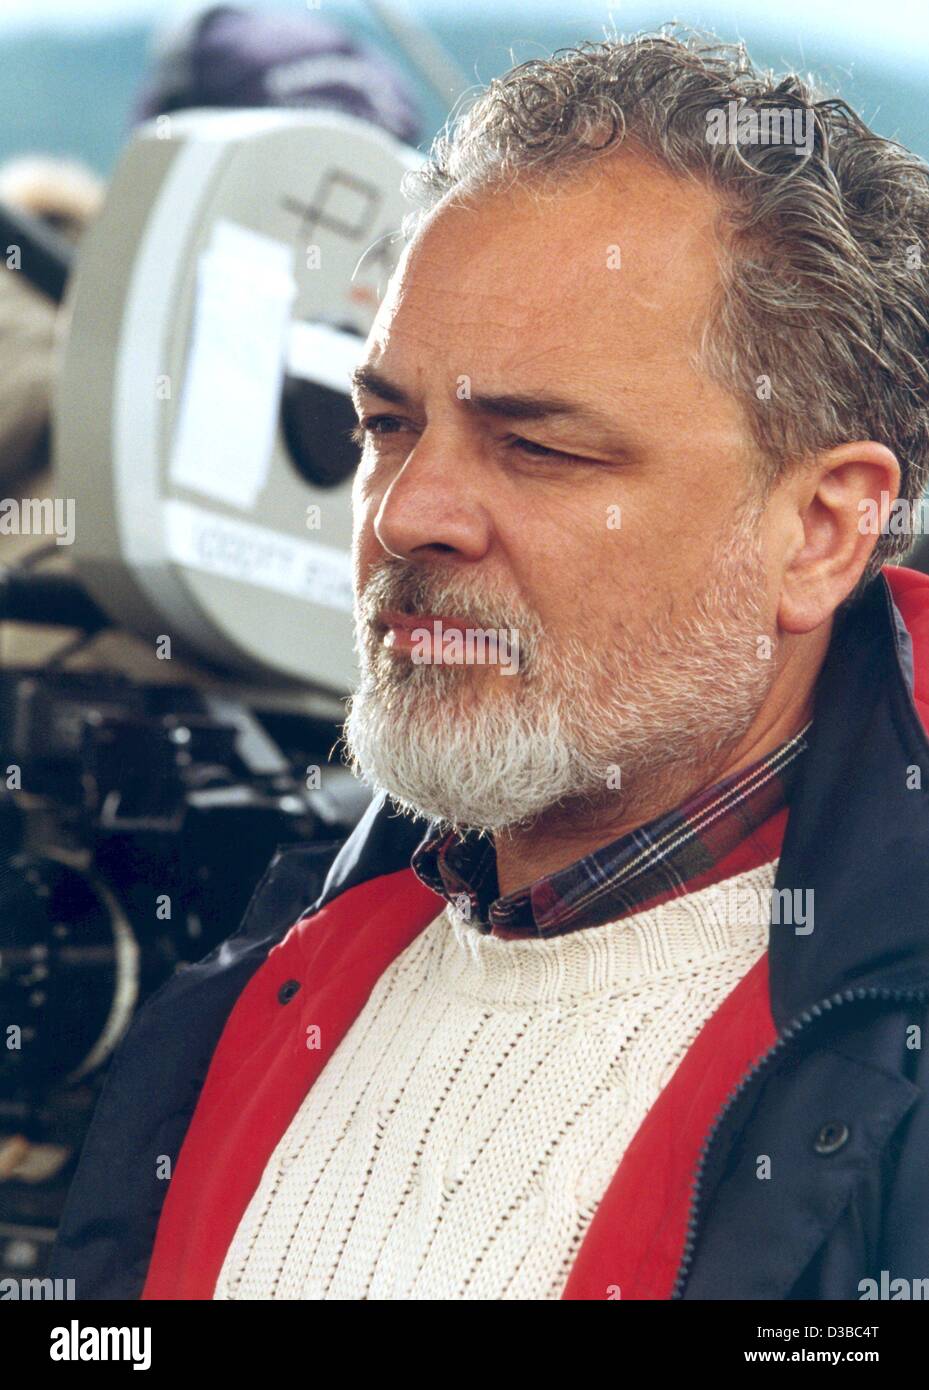 (dpa files) - German film director Uli Edel pictured on the movie set of the US-German co-production 'The Mists of Avalon' in Tocnik, West Bohemia/Czechia, 24 July 2000. Edel came to international fame with his movies 'Christiane F. - Wir Kinder vom Bahnhof Zoo' ('We Children from Bahnhof Zoo', 1981 Stock Photo